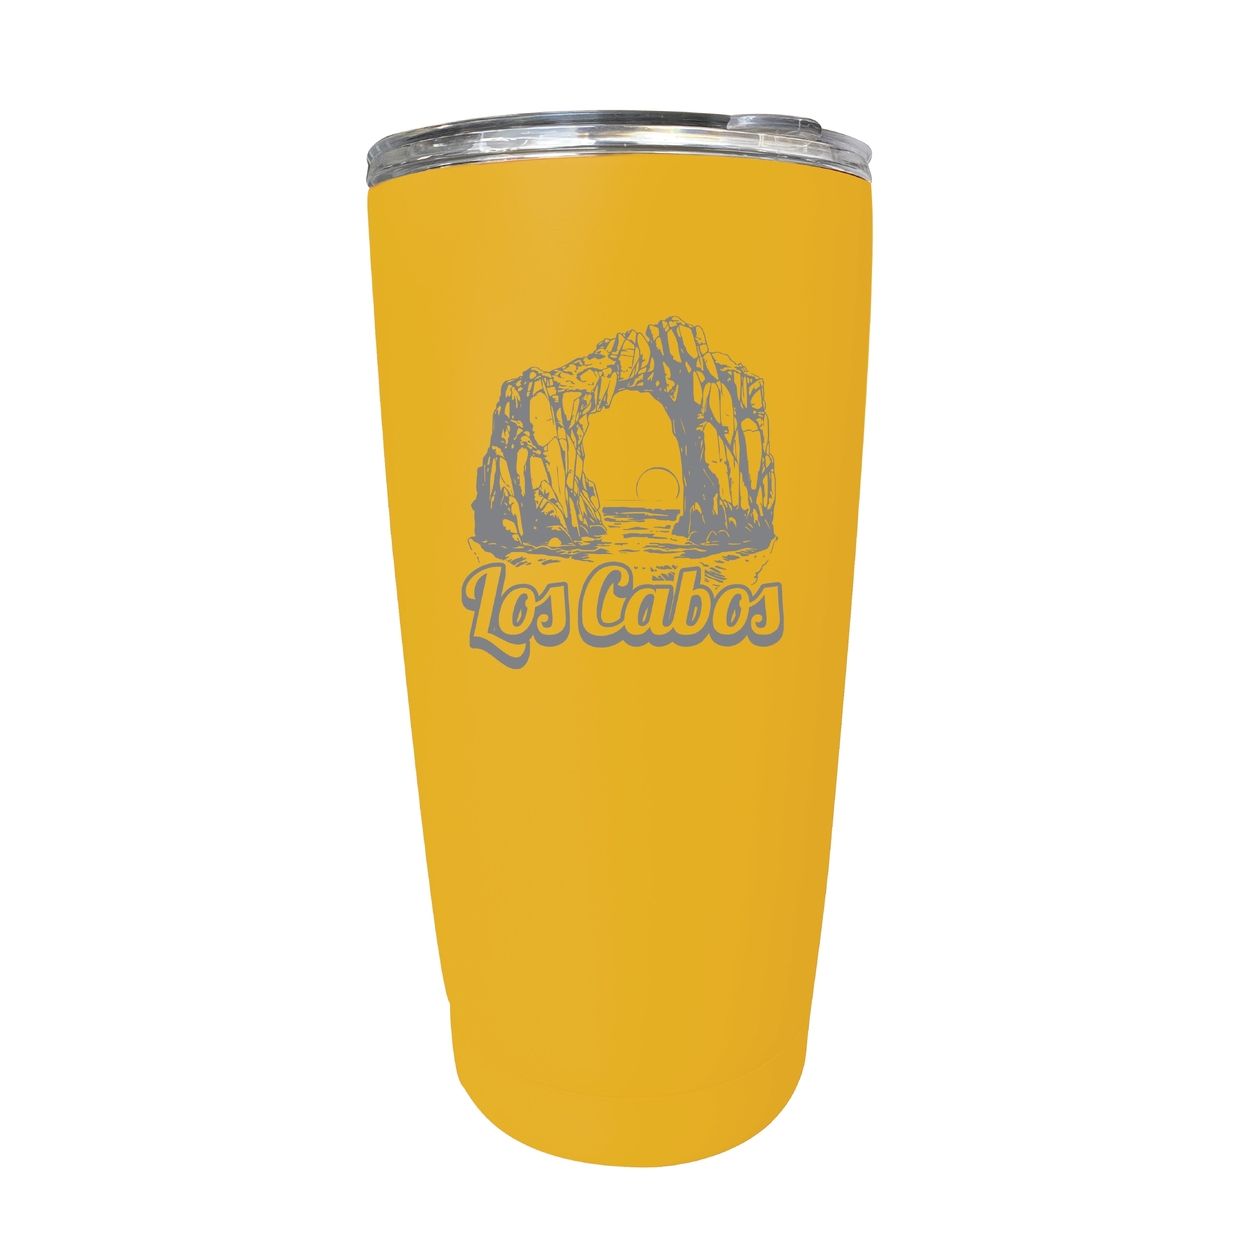 Los Cabos Mexico Souvenir 16 Oz Engraved Stainless Steel Insulated Tumbler - Yellow,,2-Pack